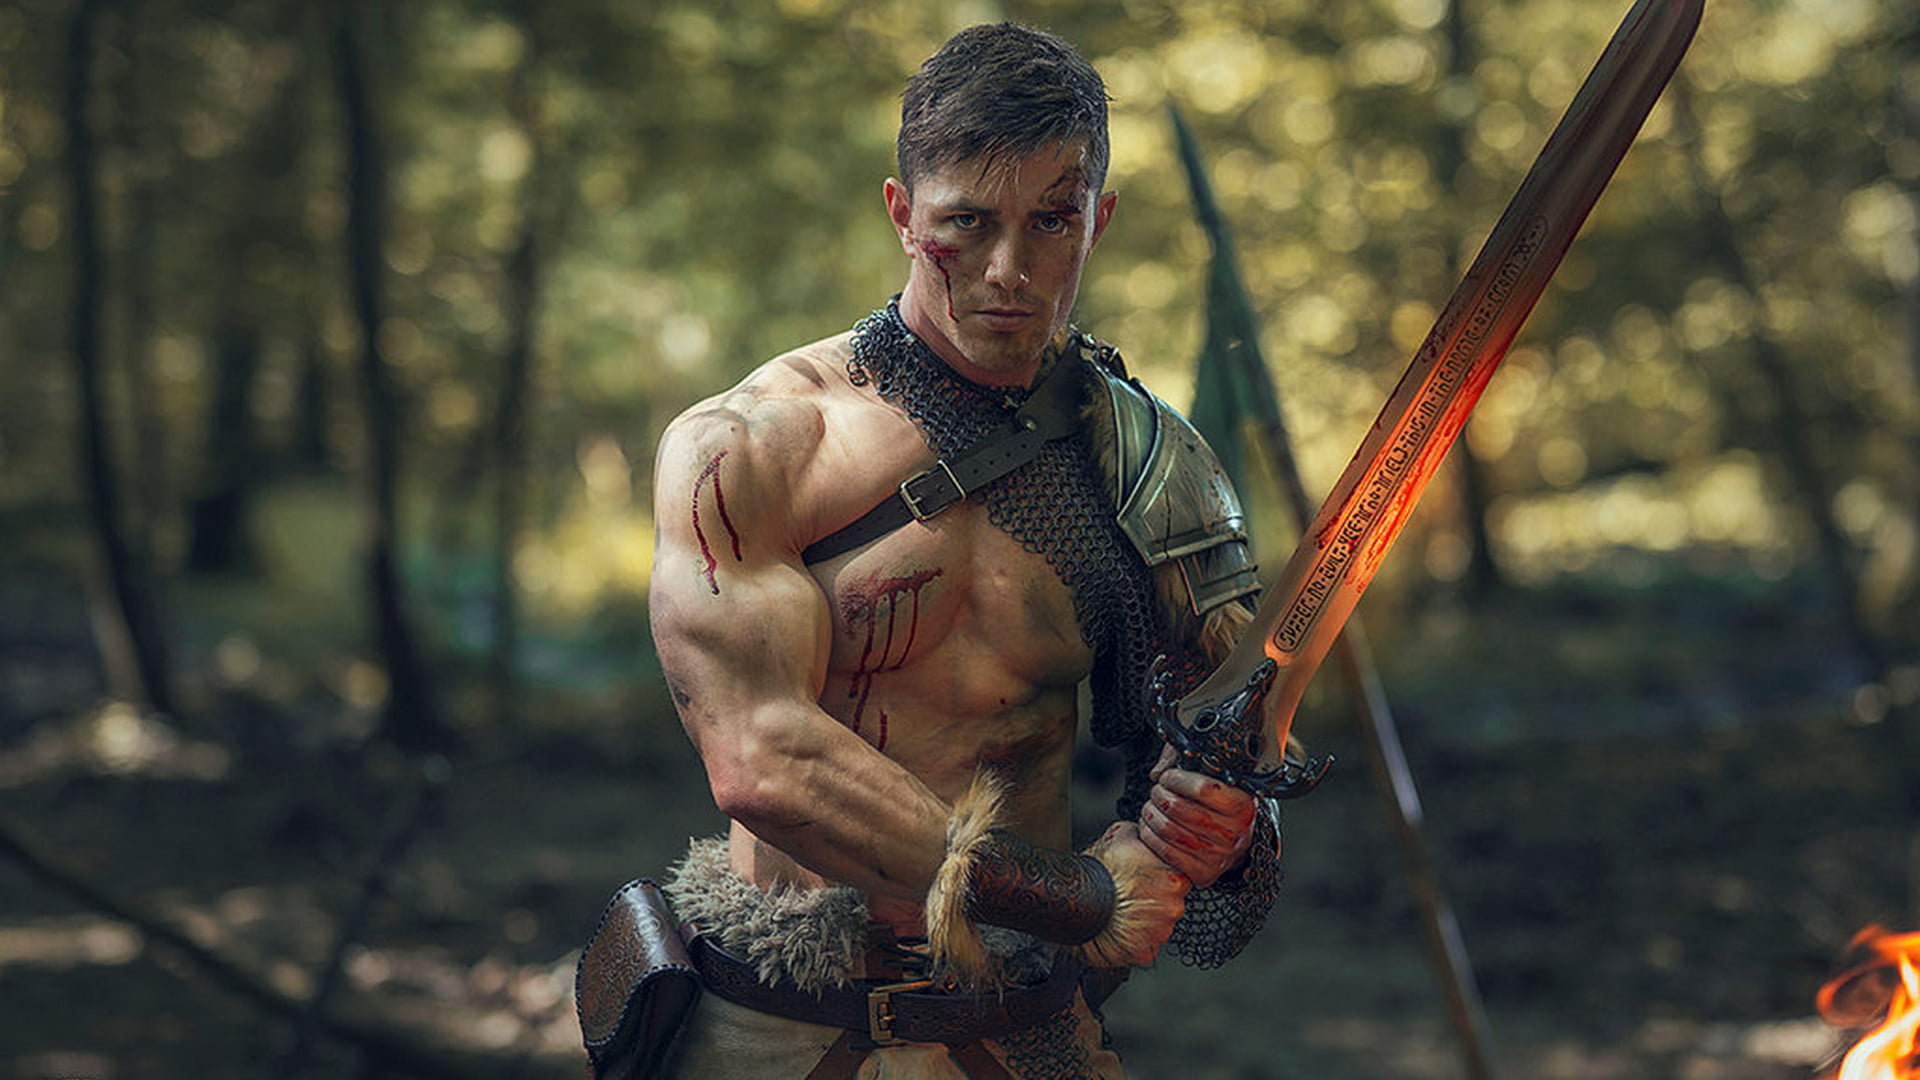 muscles, muscular, biceps, 6-pack, abs, model, warrior, forest